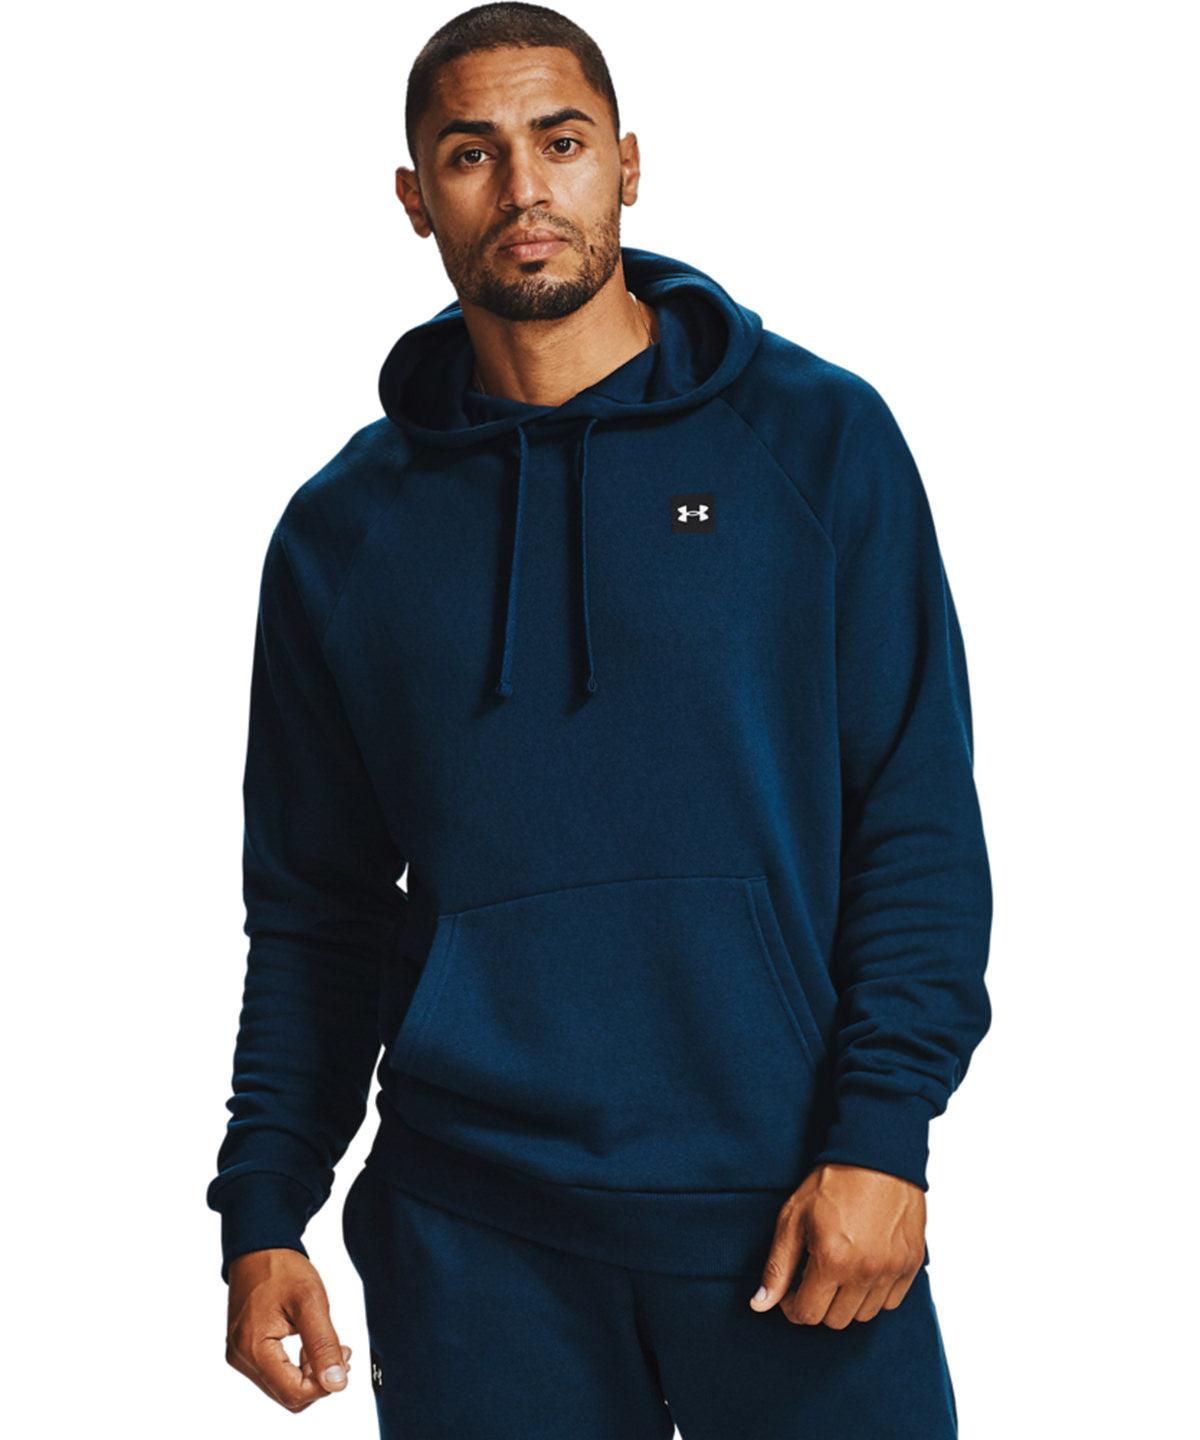 Pitch Grey Light Heather/Onyx White - Rival fleece hoodie Hoodies Under Armour Activewear & Performance, Back to the Gym, Exclusives, Gifting, Gymwear, Hoodies, Must Haves, New Colours For 2022, New Sizes for 2021, Outdoor Sports, Plus Sizes, Premium, Premium Sports, Sports & Leisure Schoolwear Centres